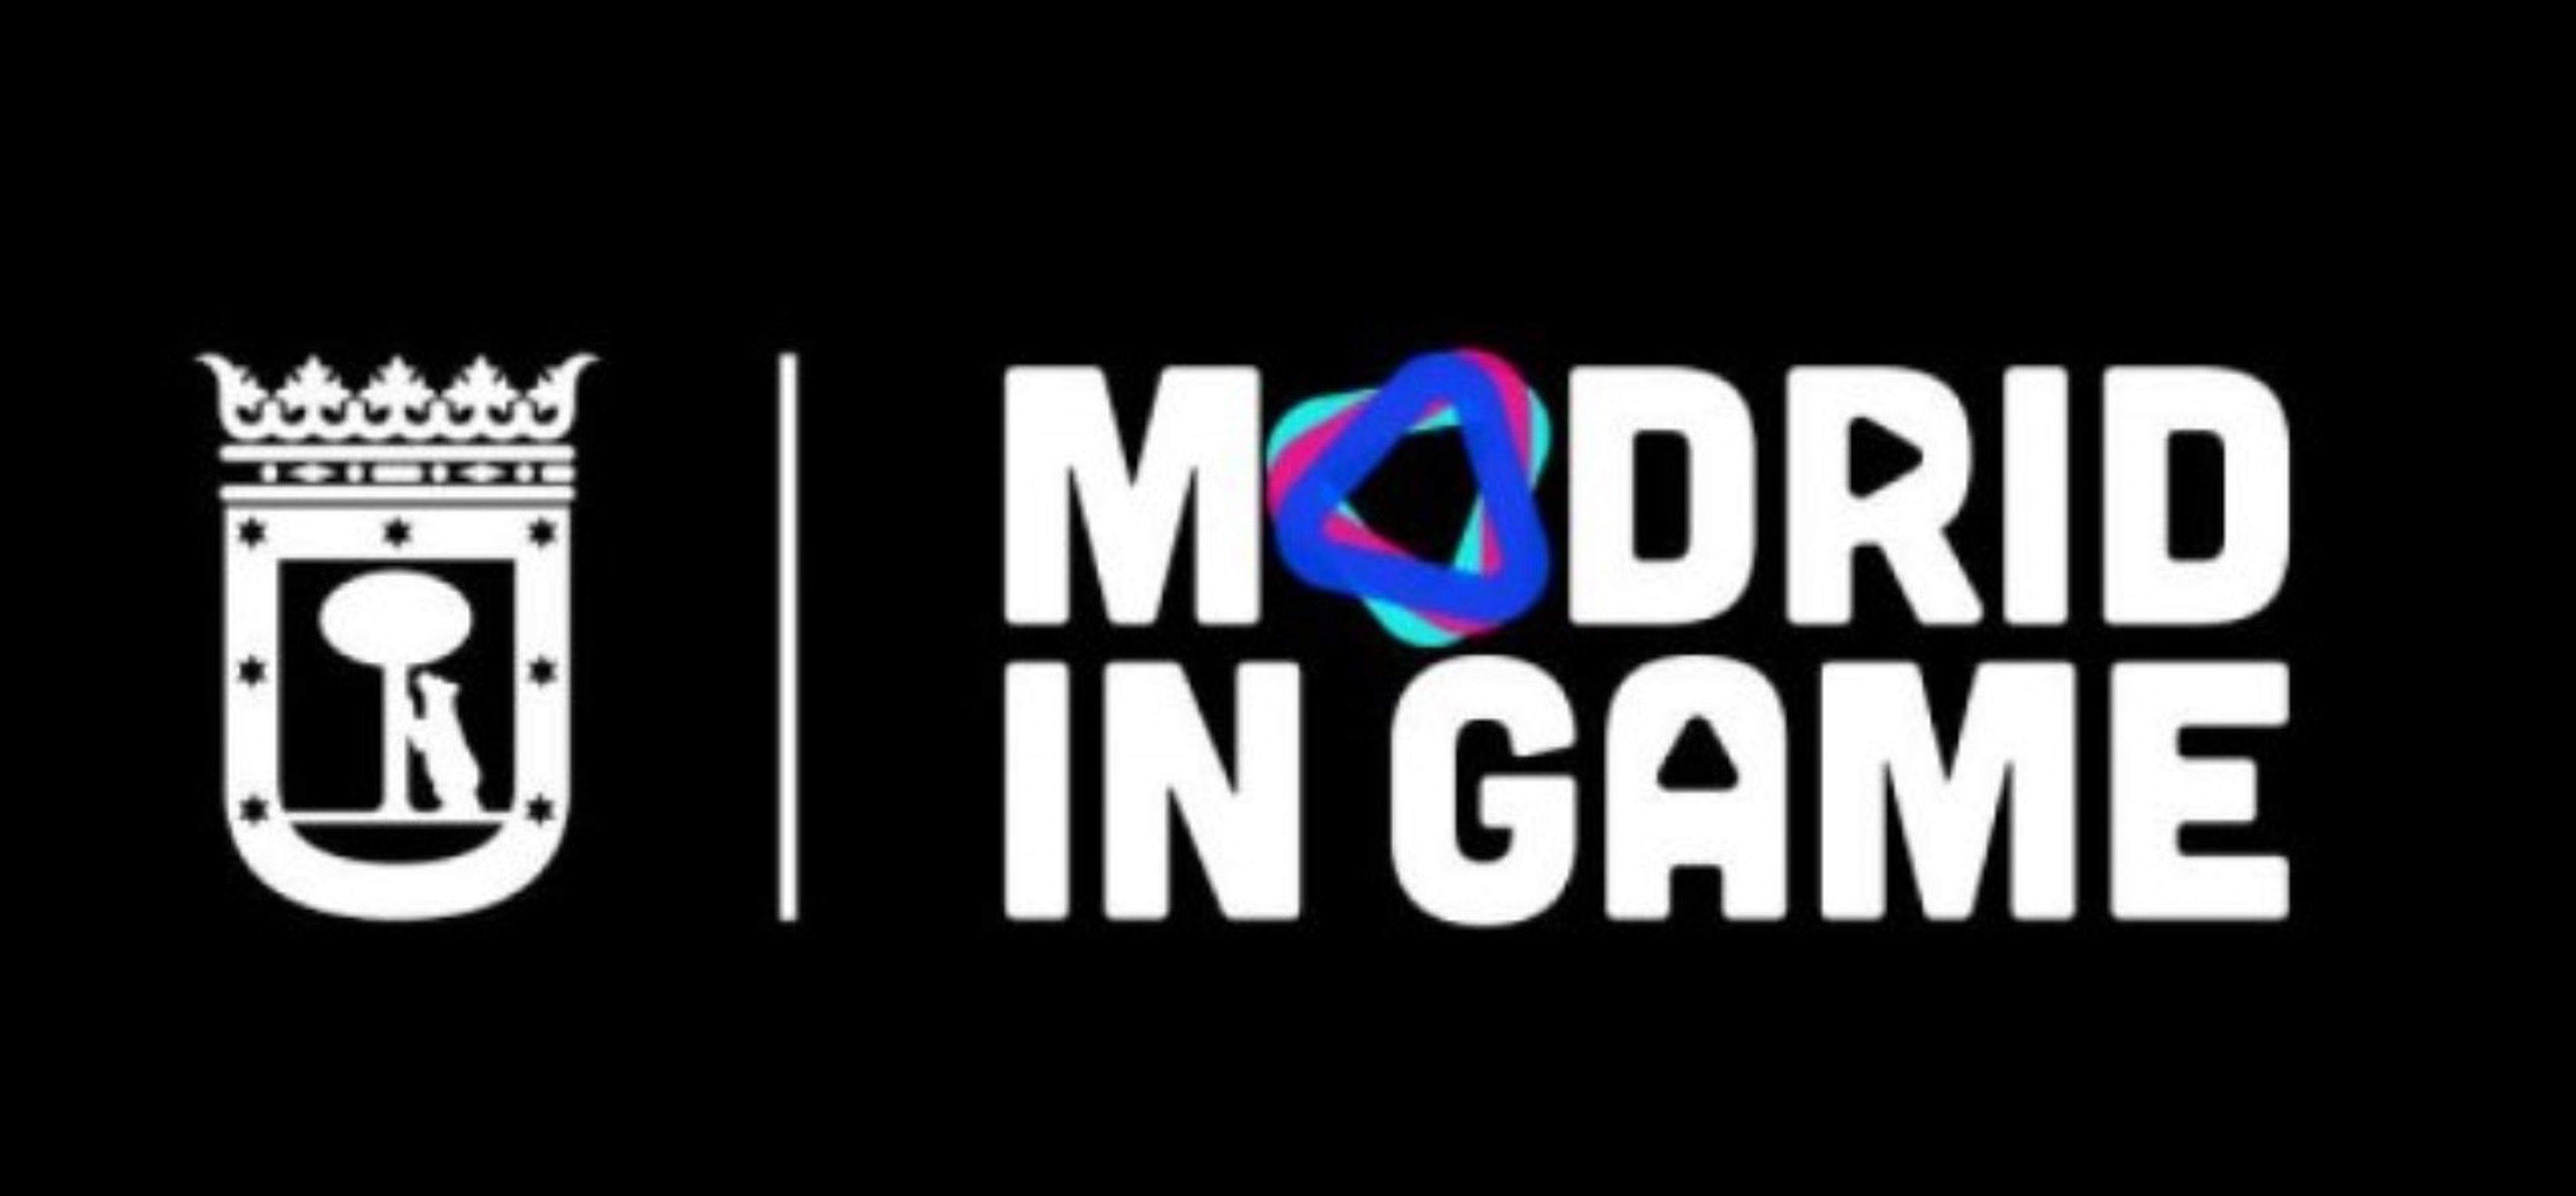 Madrid In Game Summit